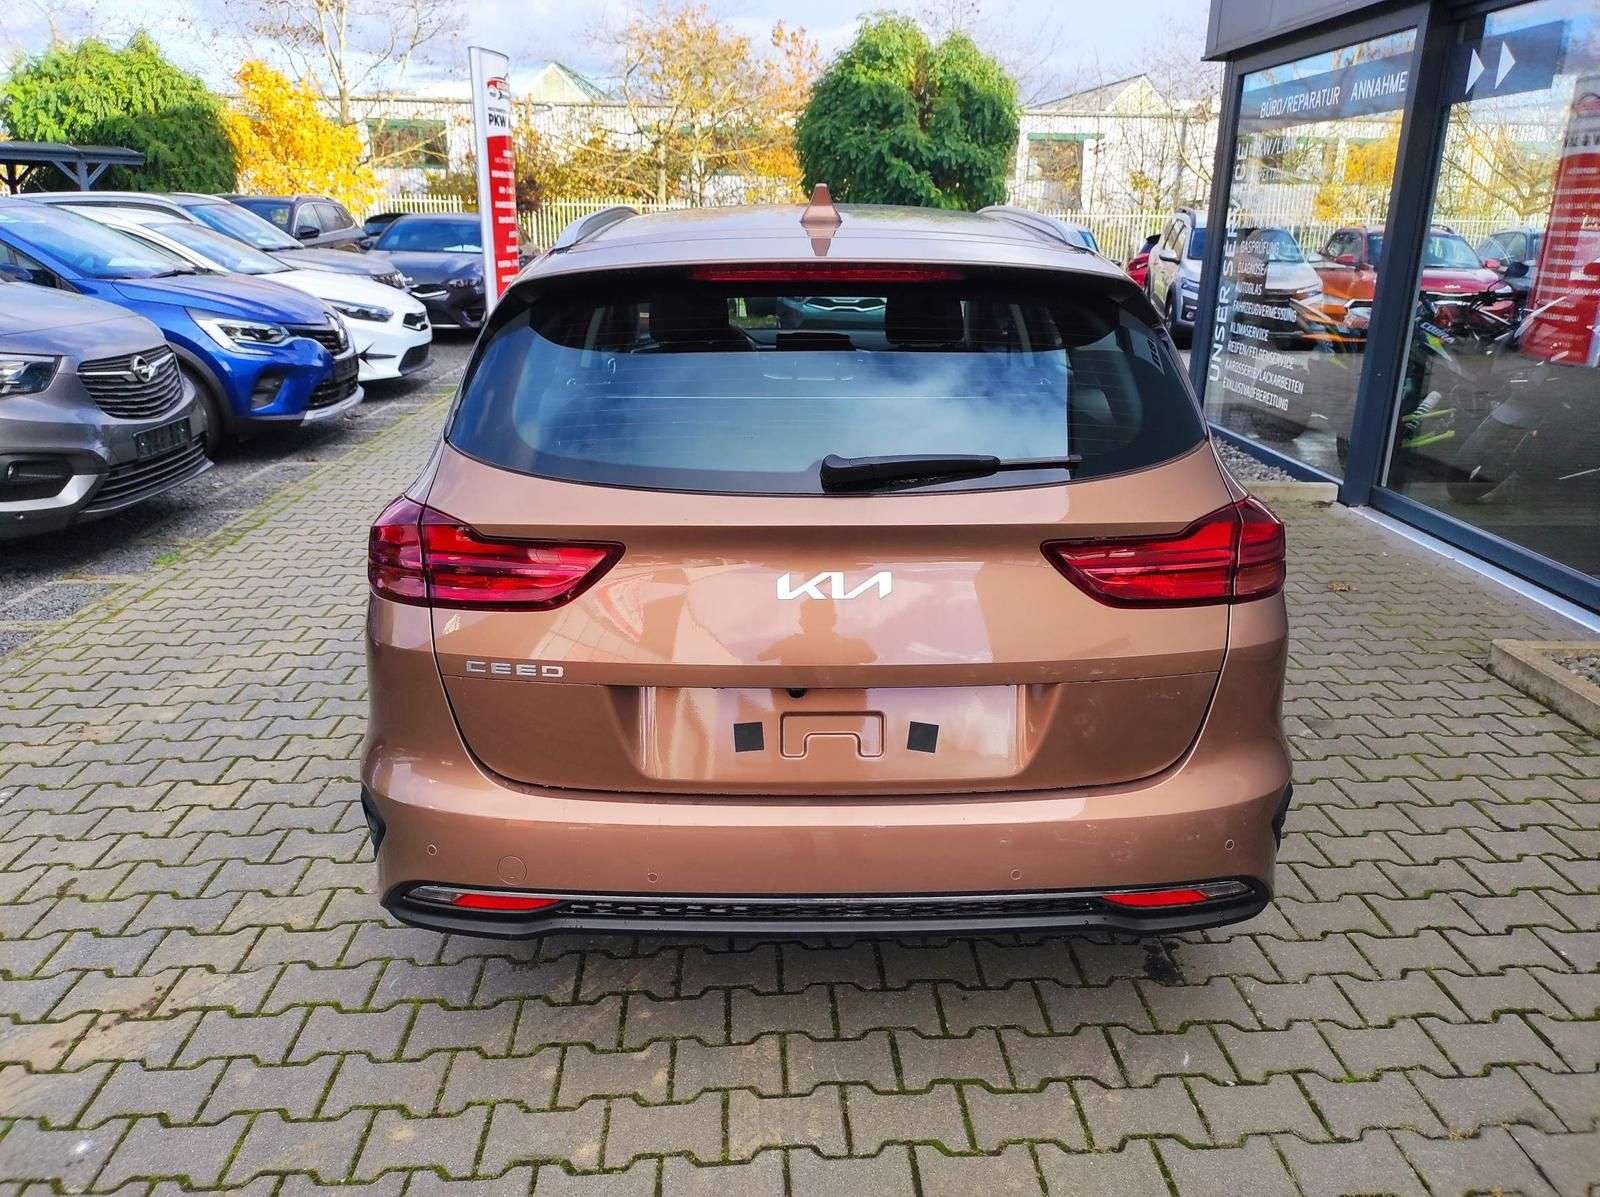 Kia Ceed SW / cee'd SW Station wagon in Brown used in Polch for € 21,990.-